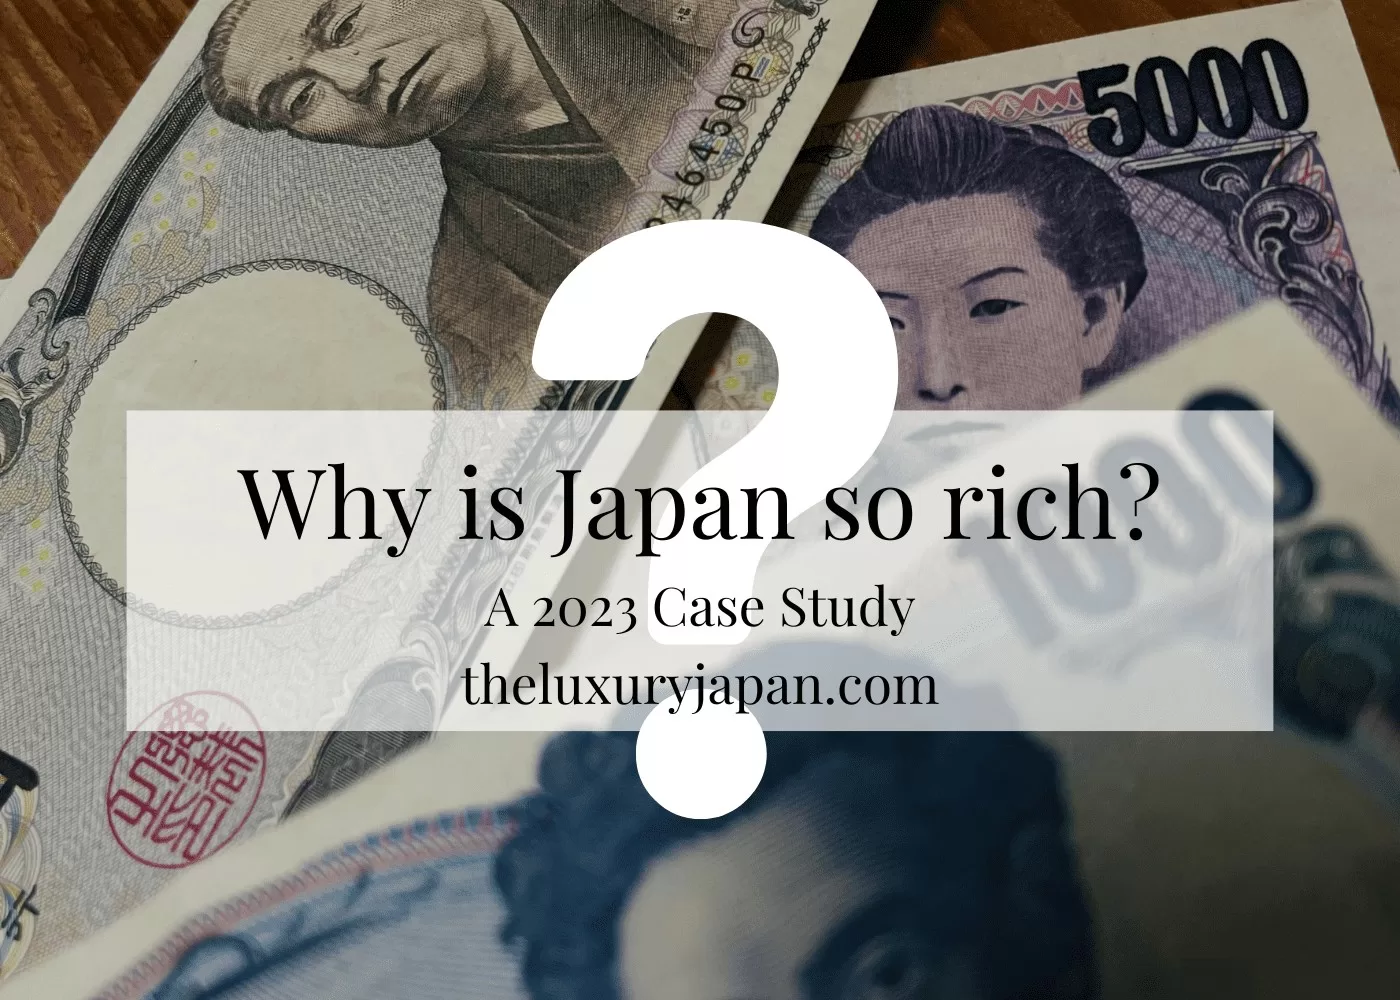 Why is Japan so rich - theluxuryjapan.com 2023 case study. Portrayed on Japanese currency - yen